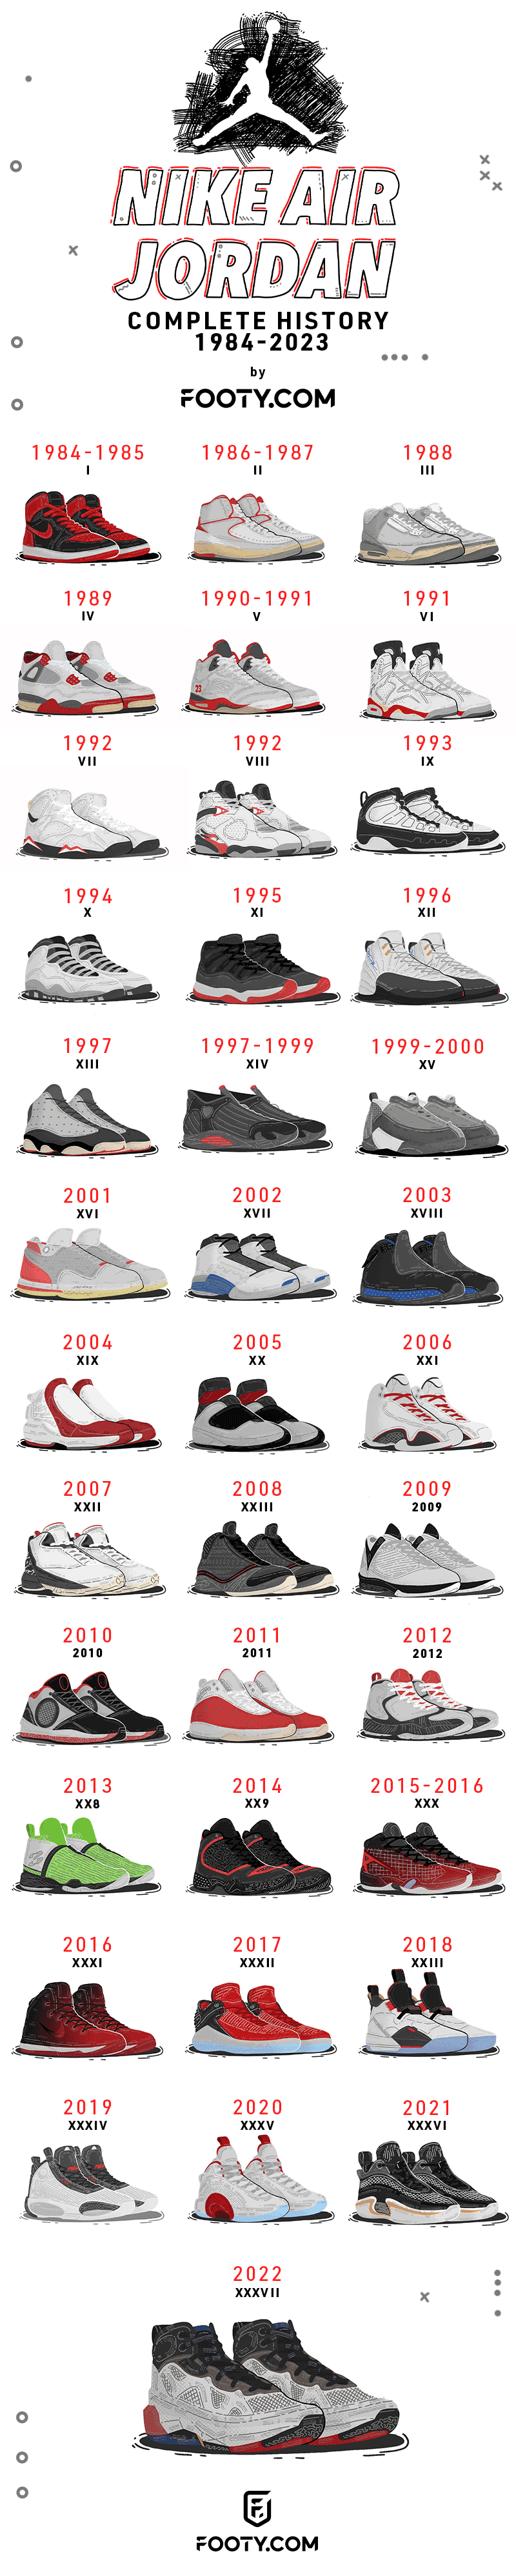 Nike Air history (complete 1984-2023 | FOOTY.COM Blog